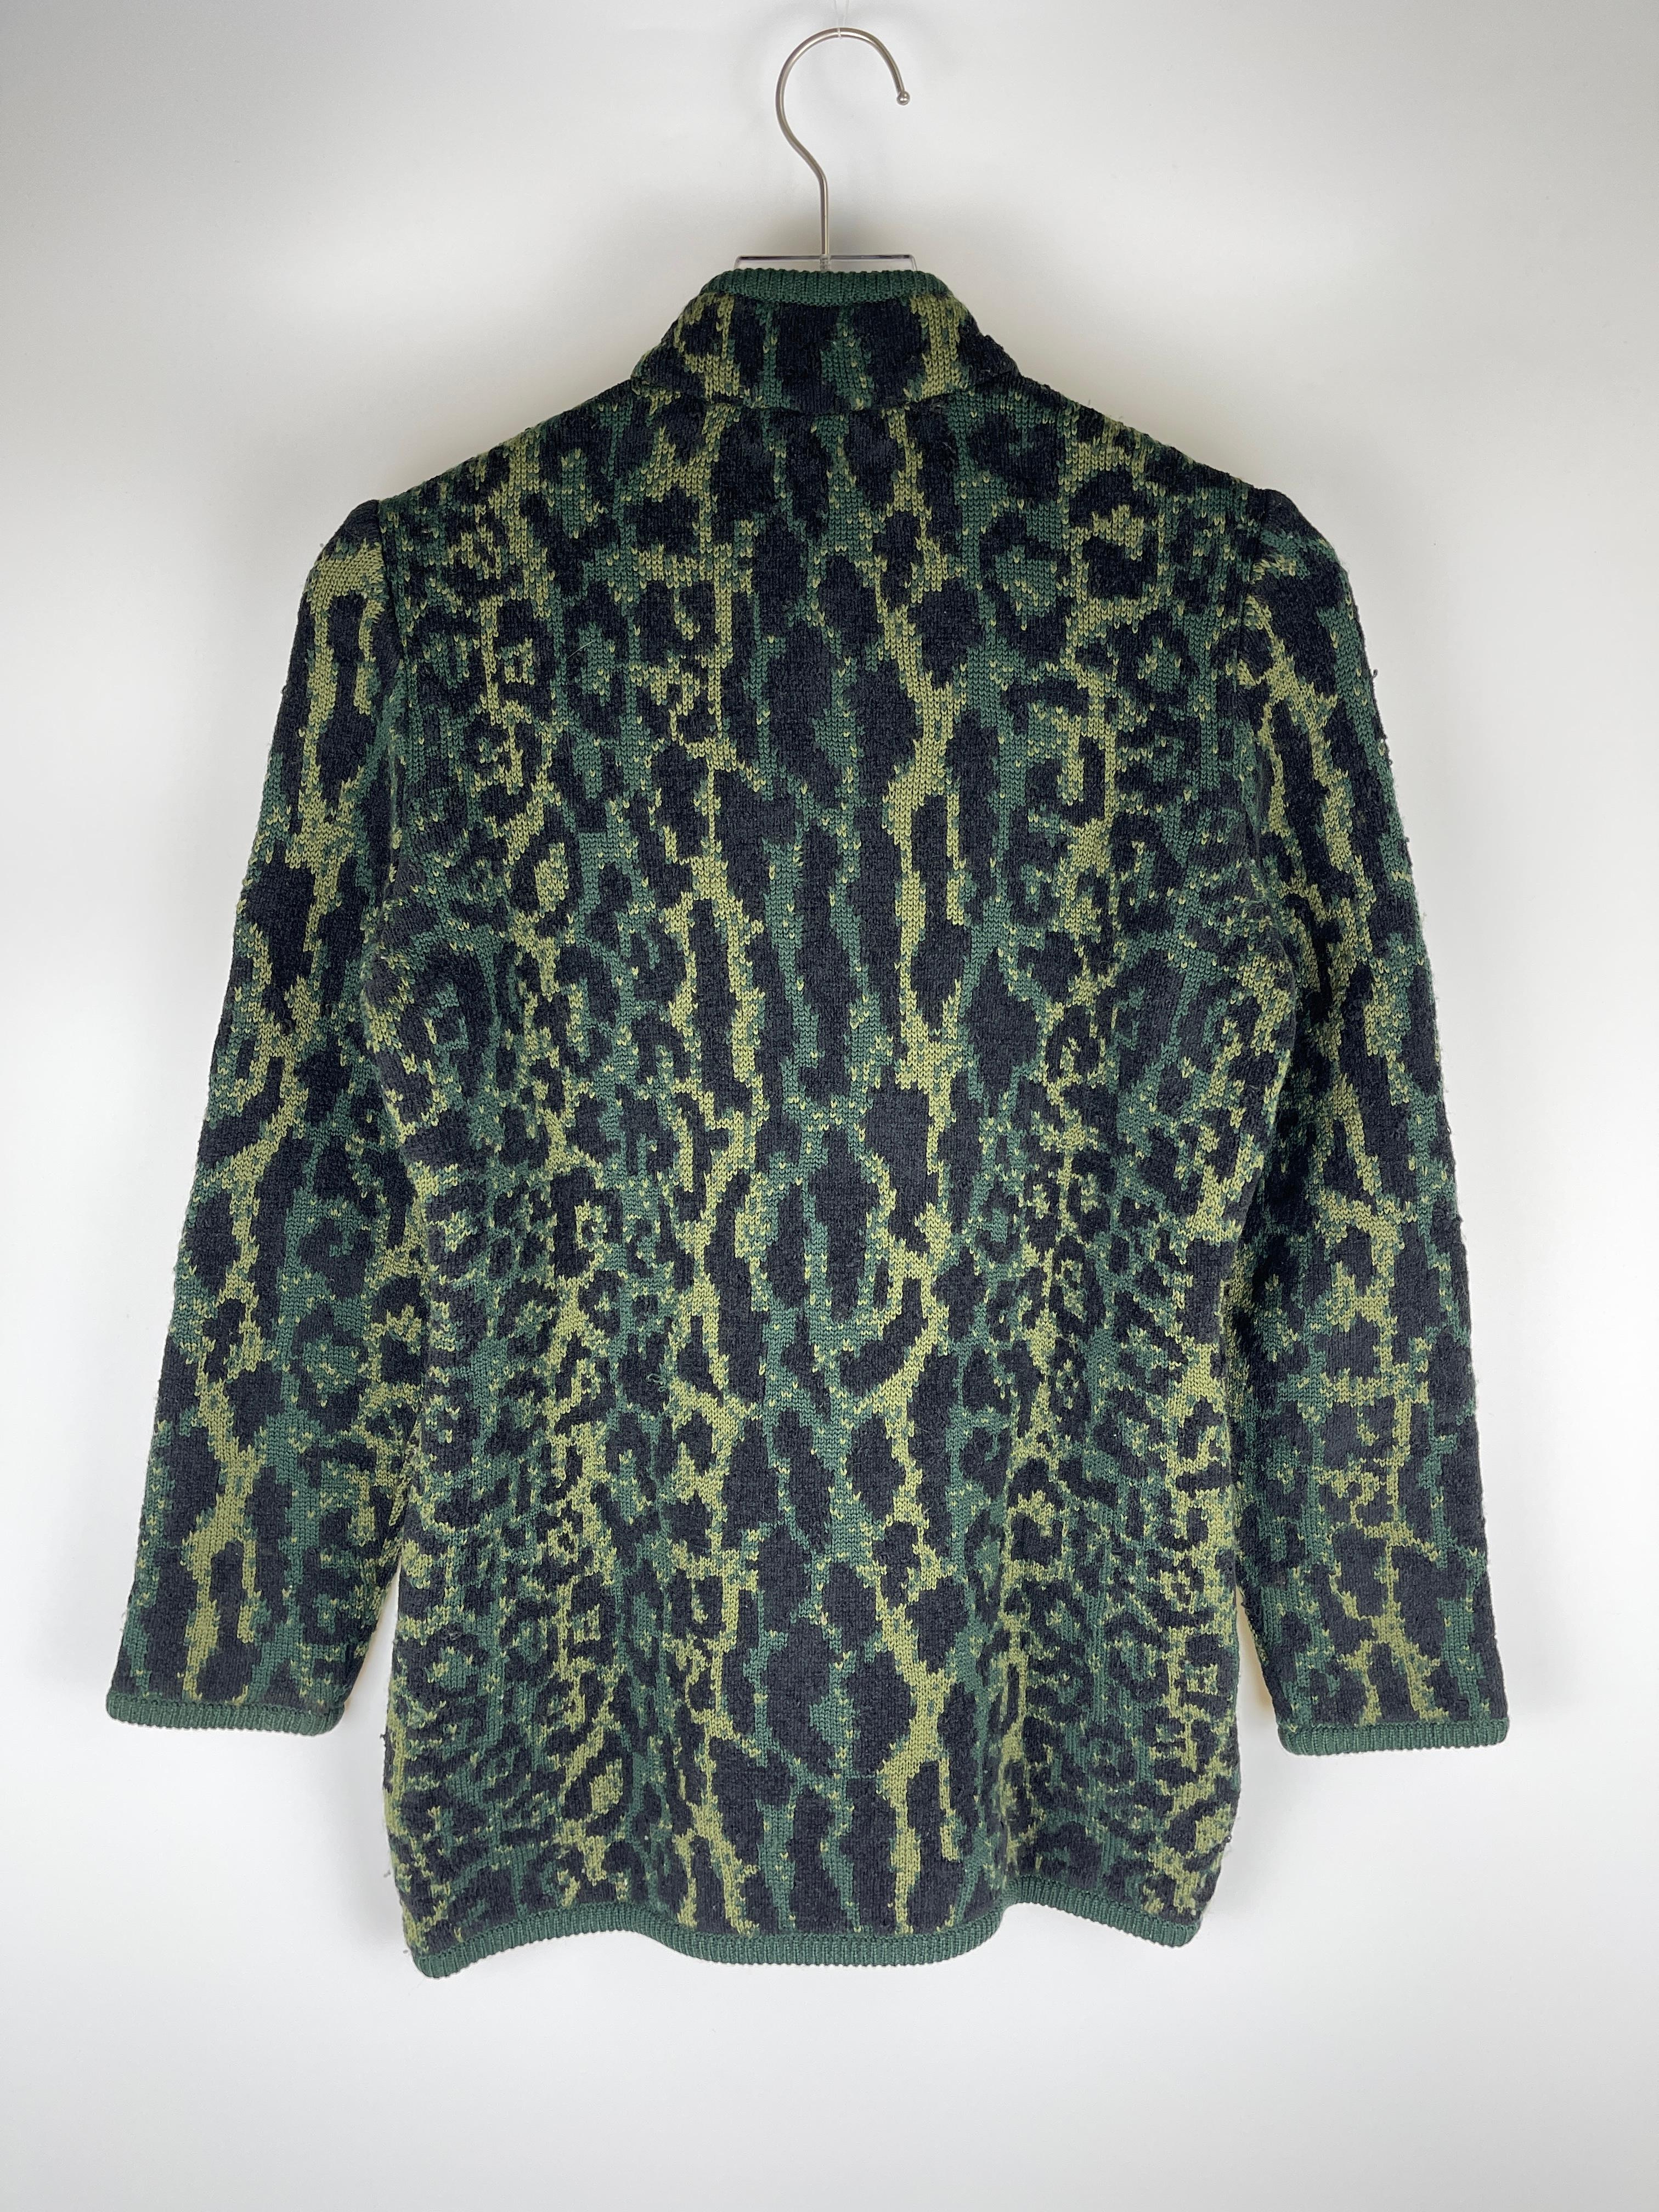 Yves Saint Laurent 1980's Snow Leopard Sweater  In Good Condition For Sale In Seattle, WA